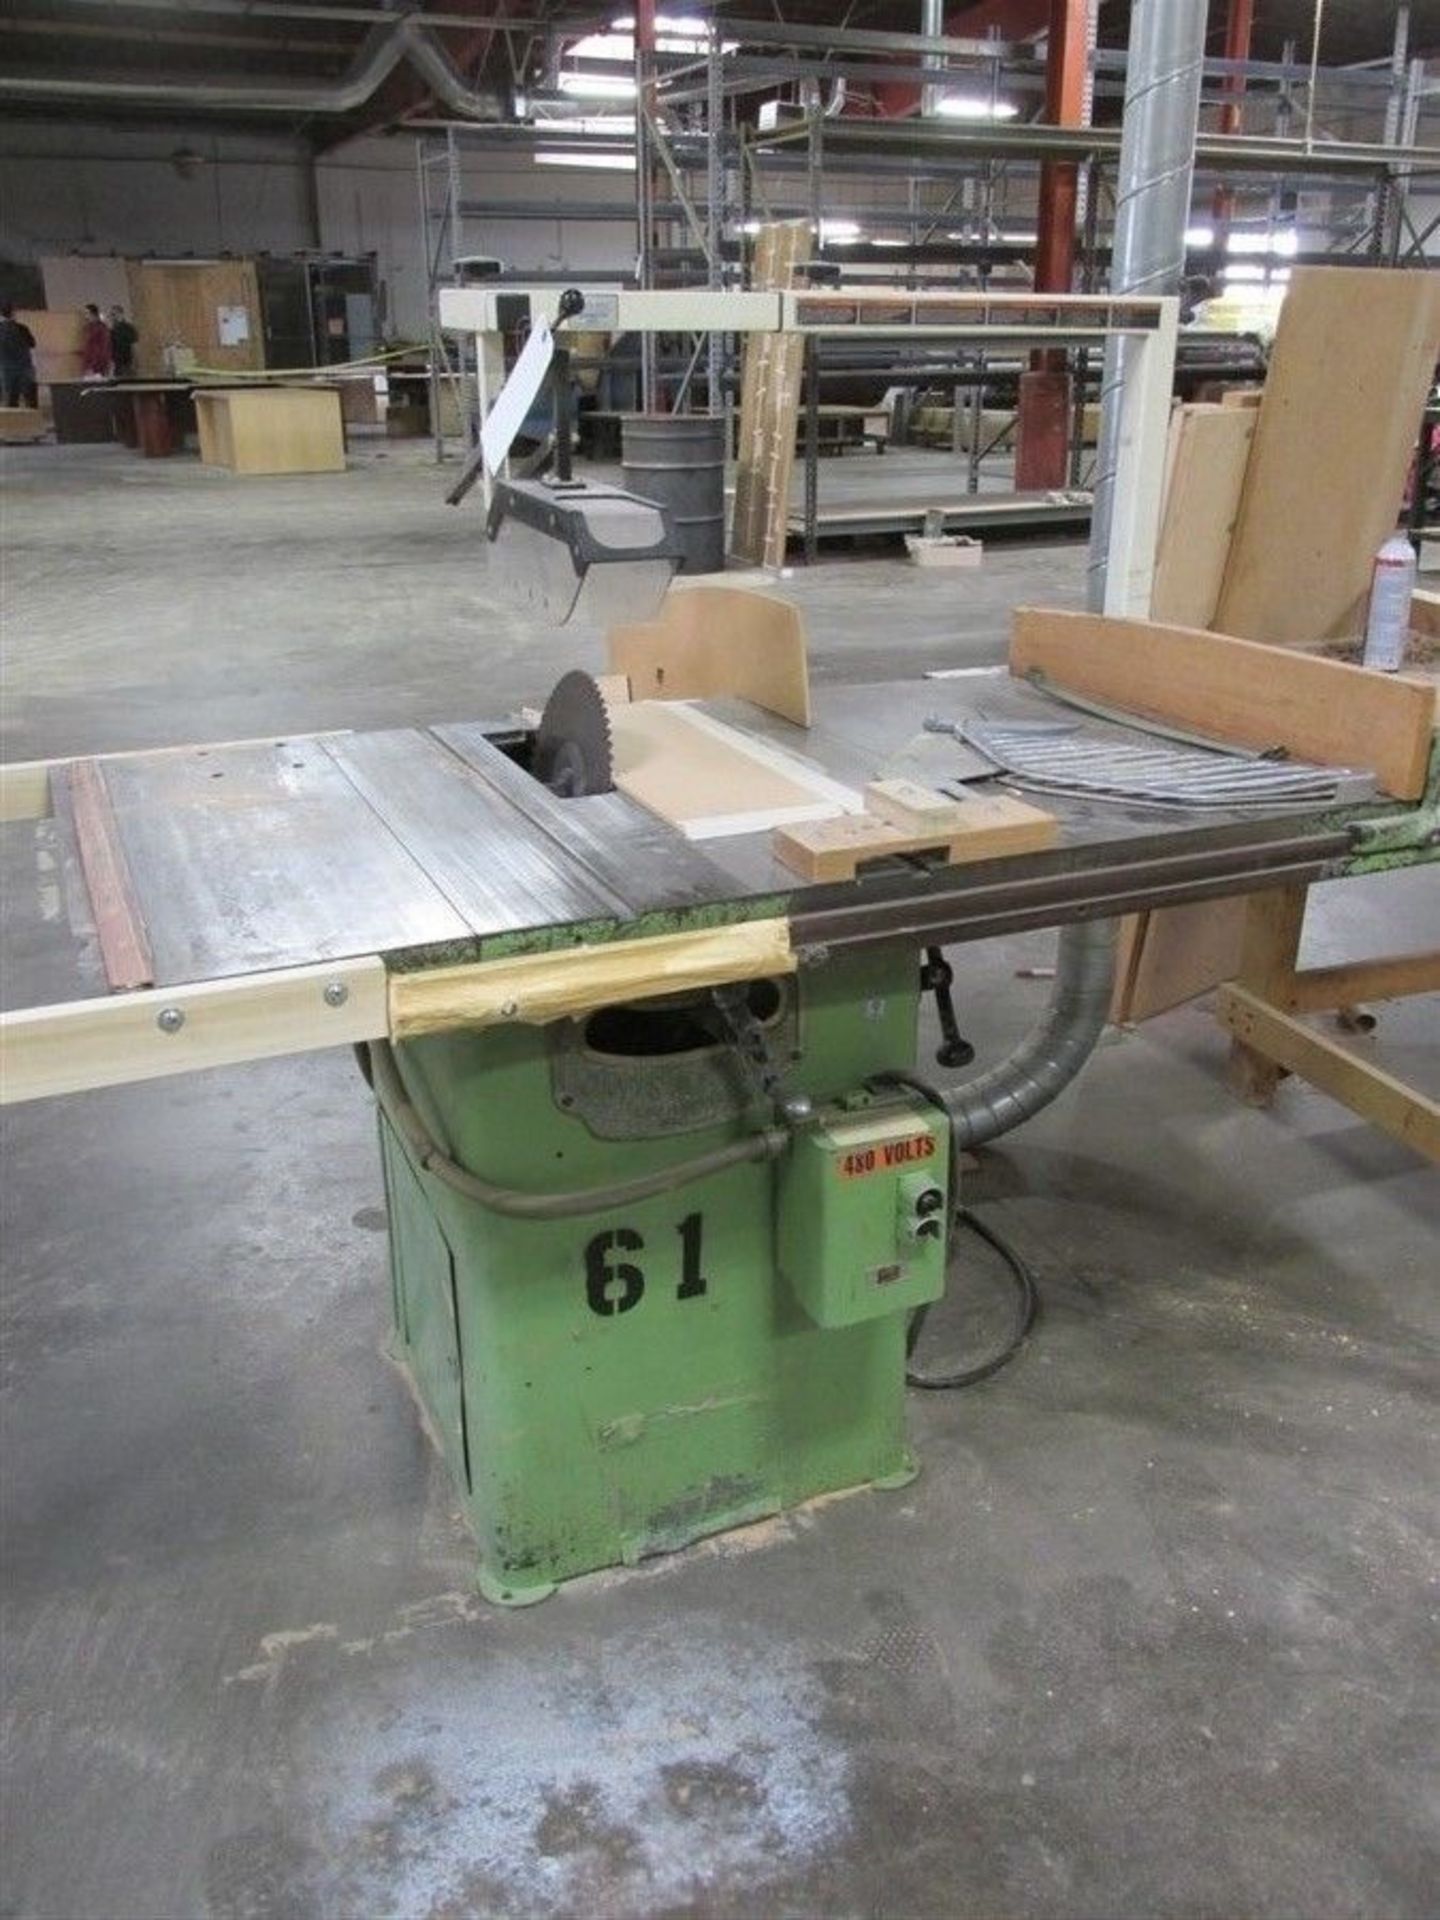 10" DAVIS & WELLS 4 HP TABLE SAW w/ BIESEMEYER BLADE GUARD VOLTAGE: 480 PHASE: 3 AMPS: 7.5 HP: 4 - Image 2 of 6